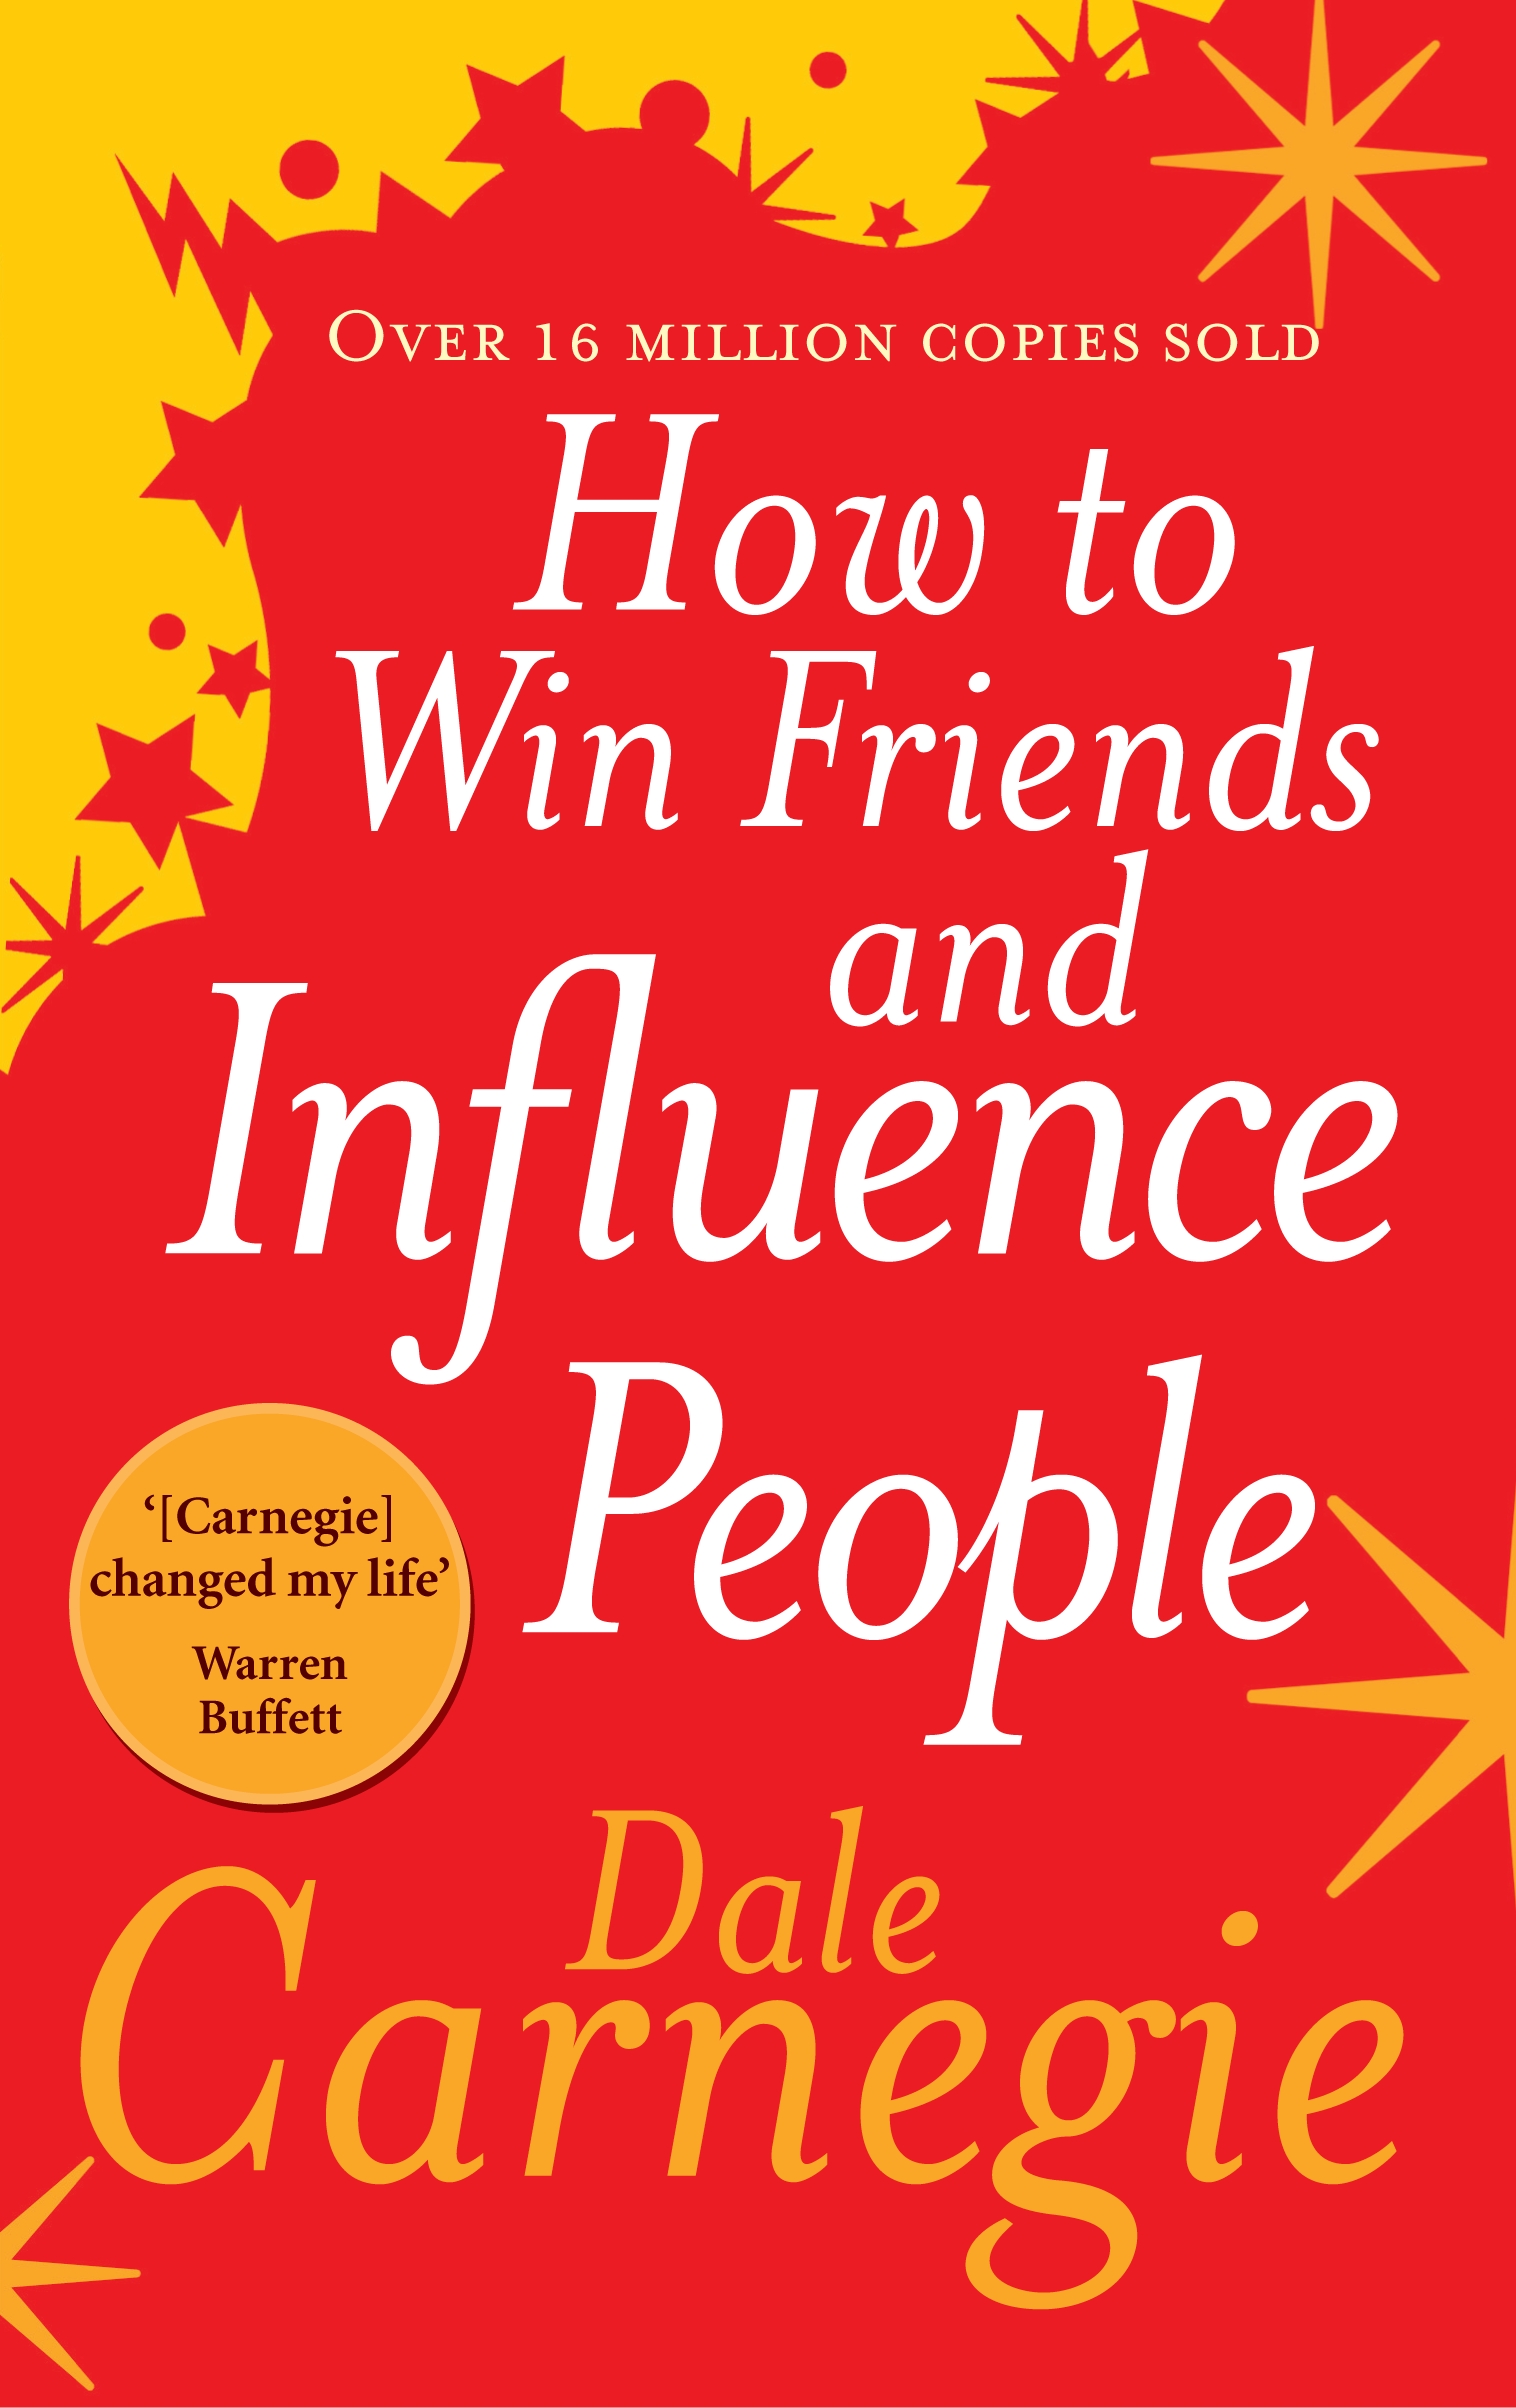 How to Win Friends and Influence People download the new version for apple